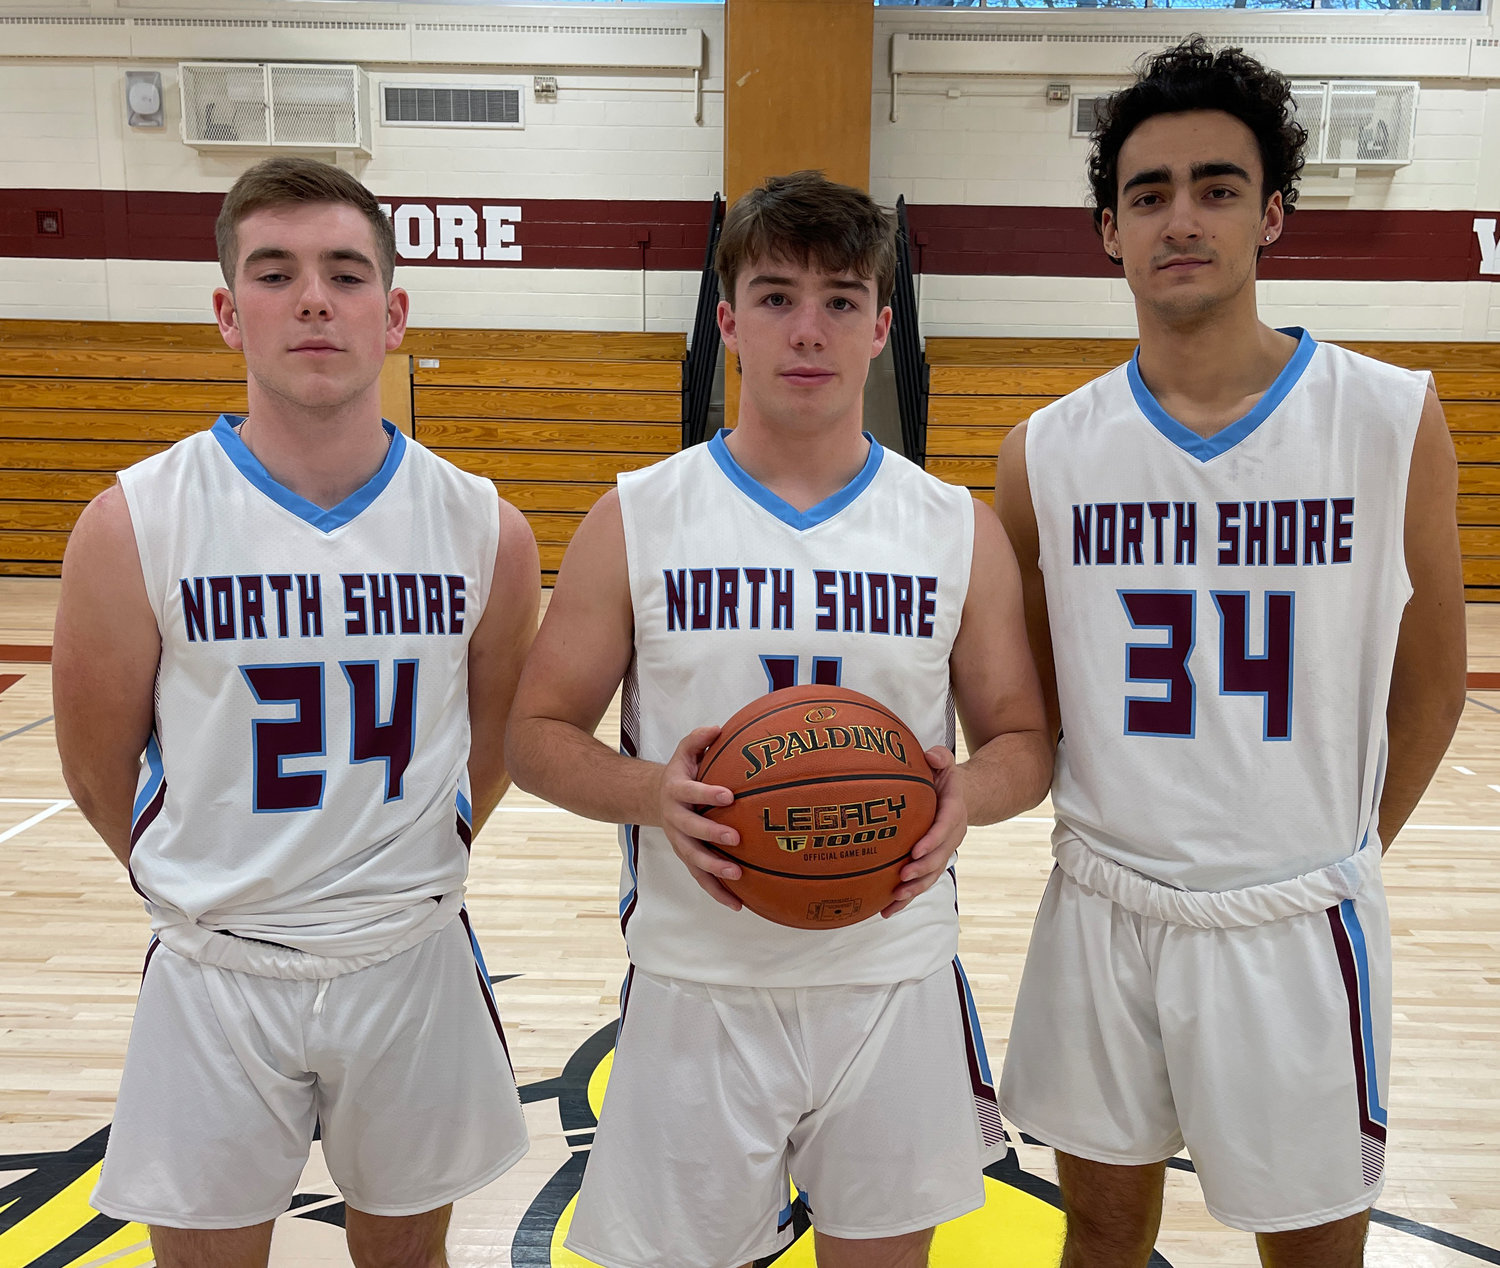 Leading the Vikings’ hopes for a deep playoff run are, from left, Ryan Freund, Nick La Rosa and Vasilis Triantafyllou.